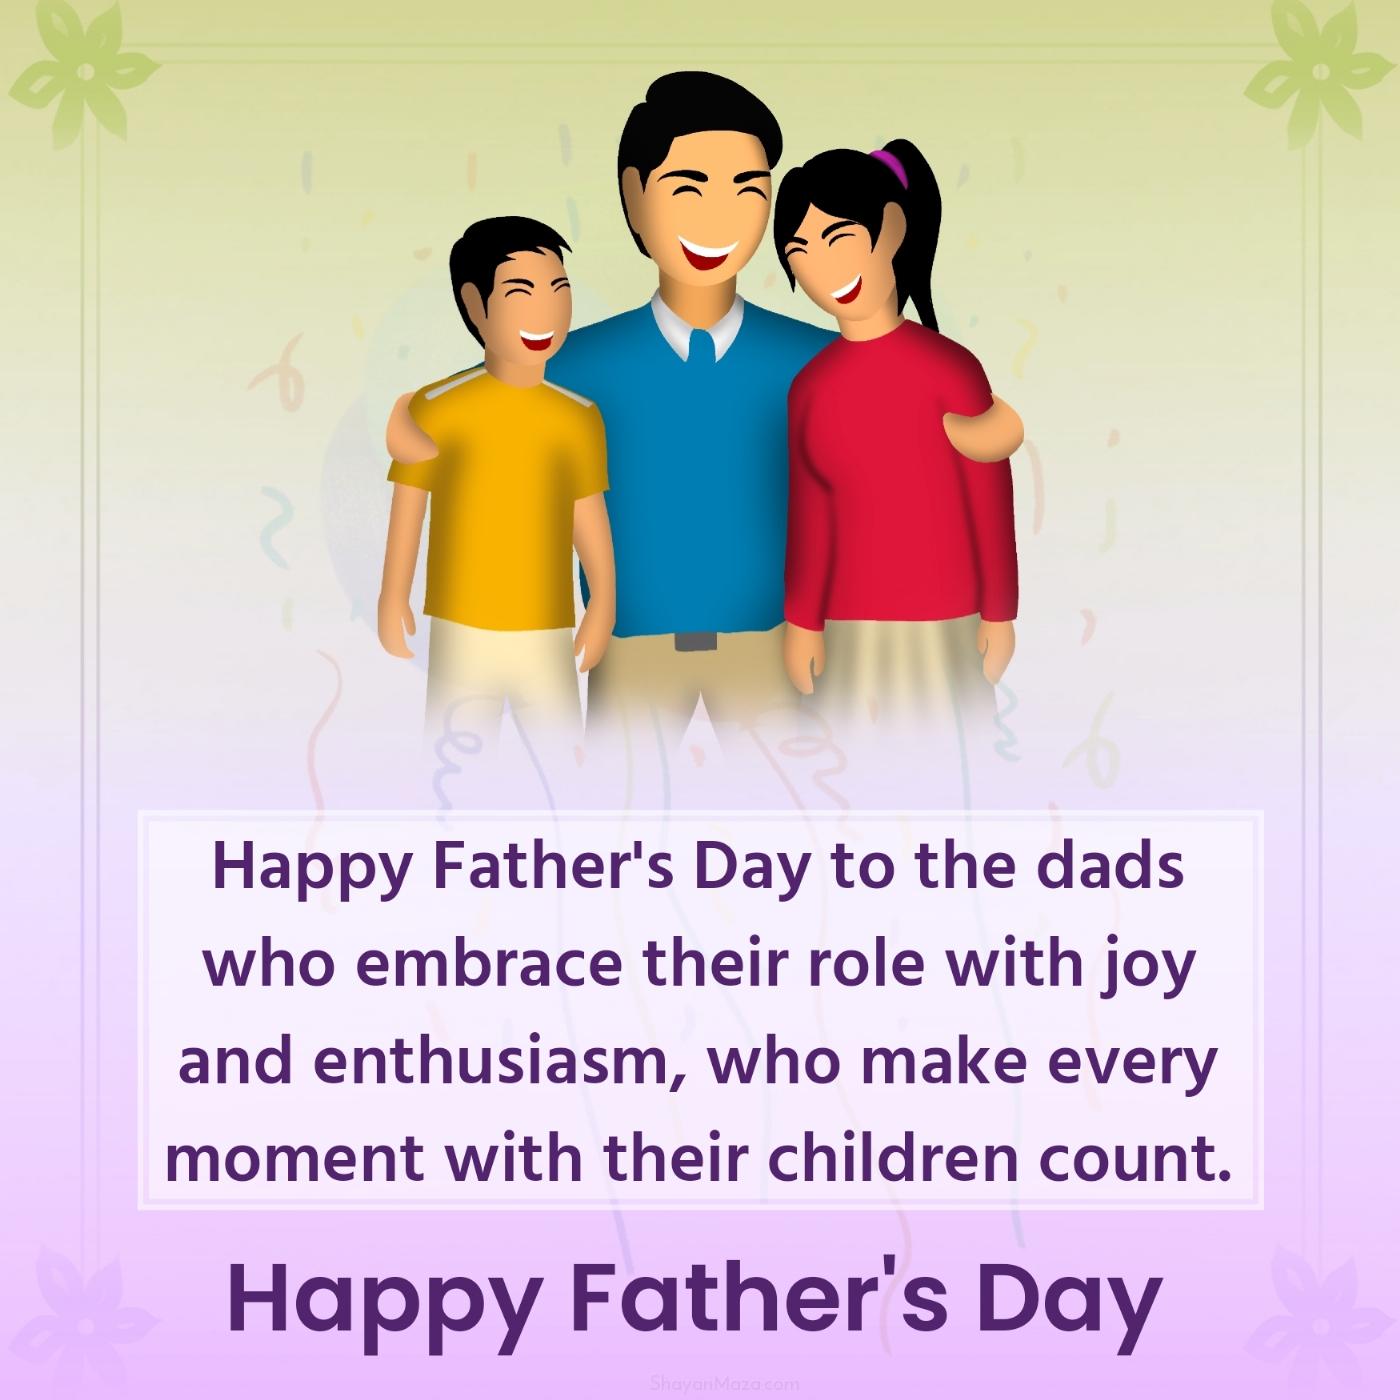 Happy Father's Day to the dads who embrace their role with joy and enthusiasm